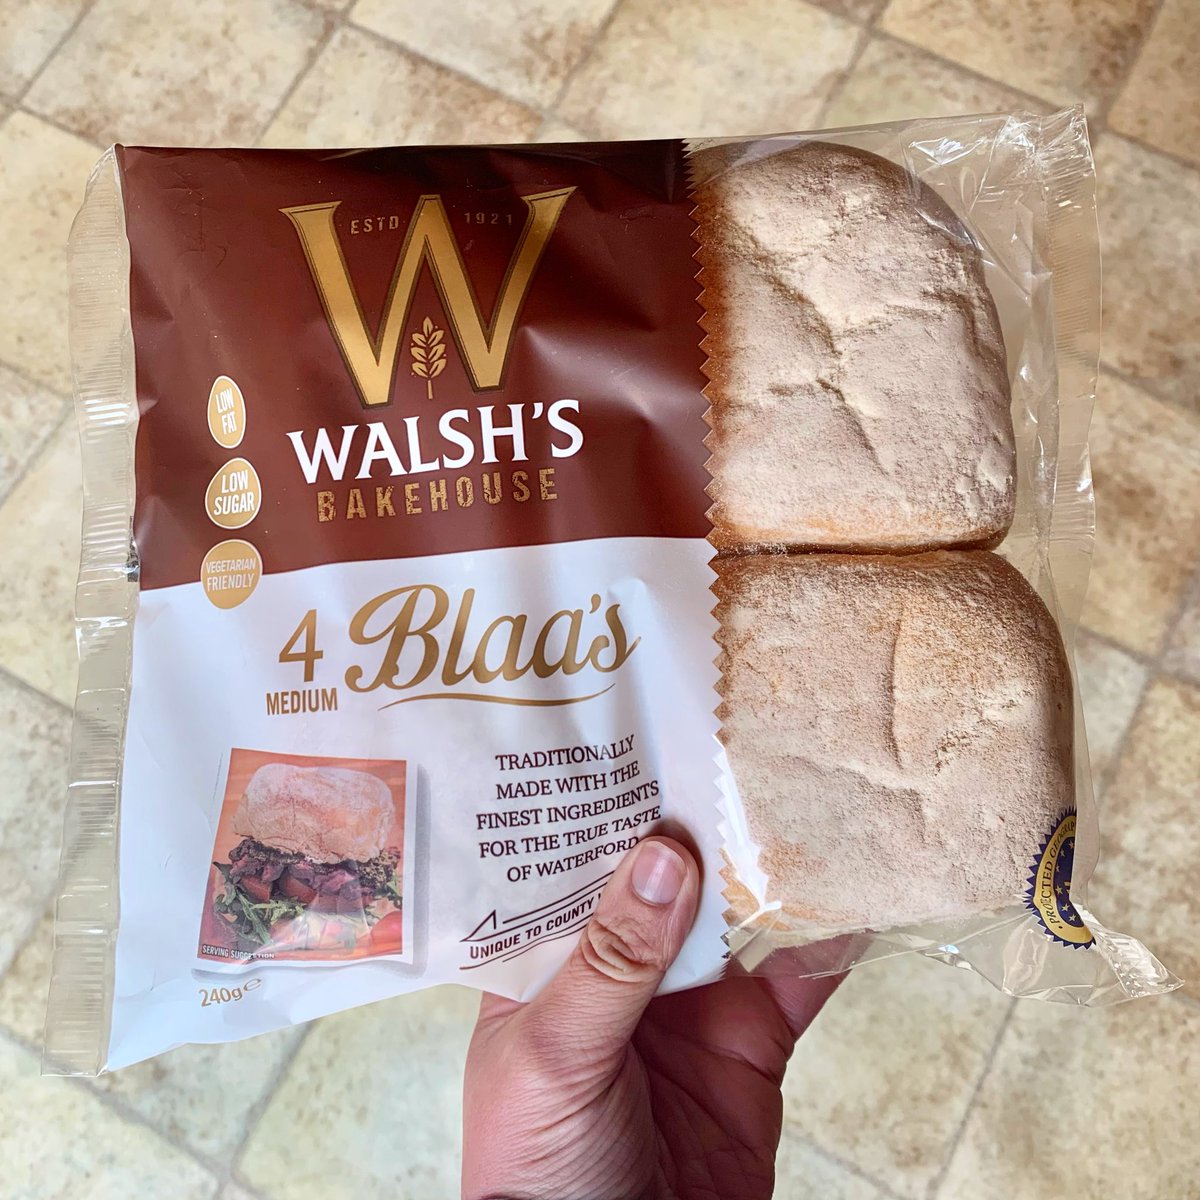 Waterfordians - did you know you can still get your Blaa fix, even if you’re not living in the Déise? 😍 @lidl_ireland is now stocking Blaas in stores nationwide 🙌🏼 #WaterfordBlaa #LidlIreland